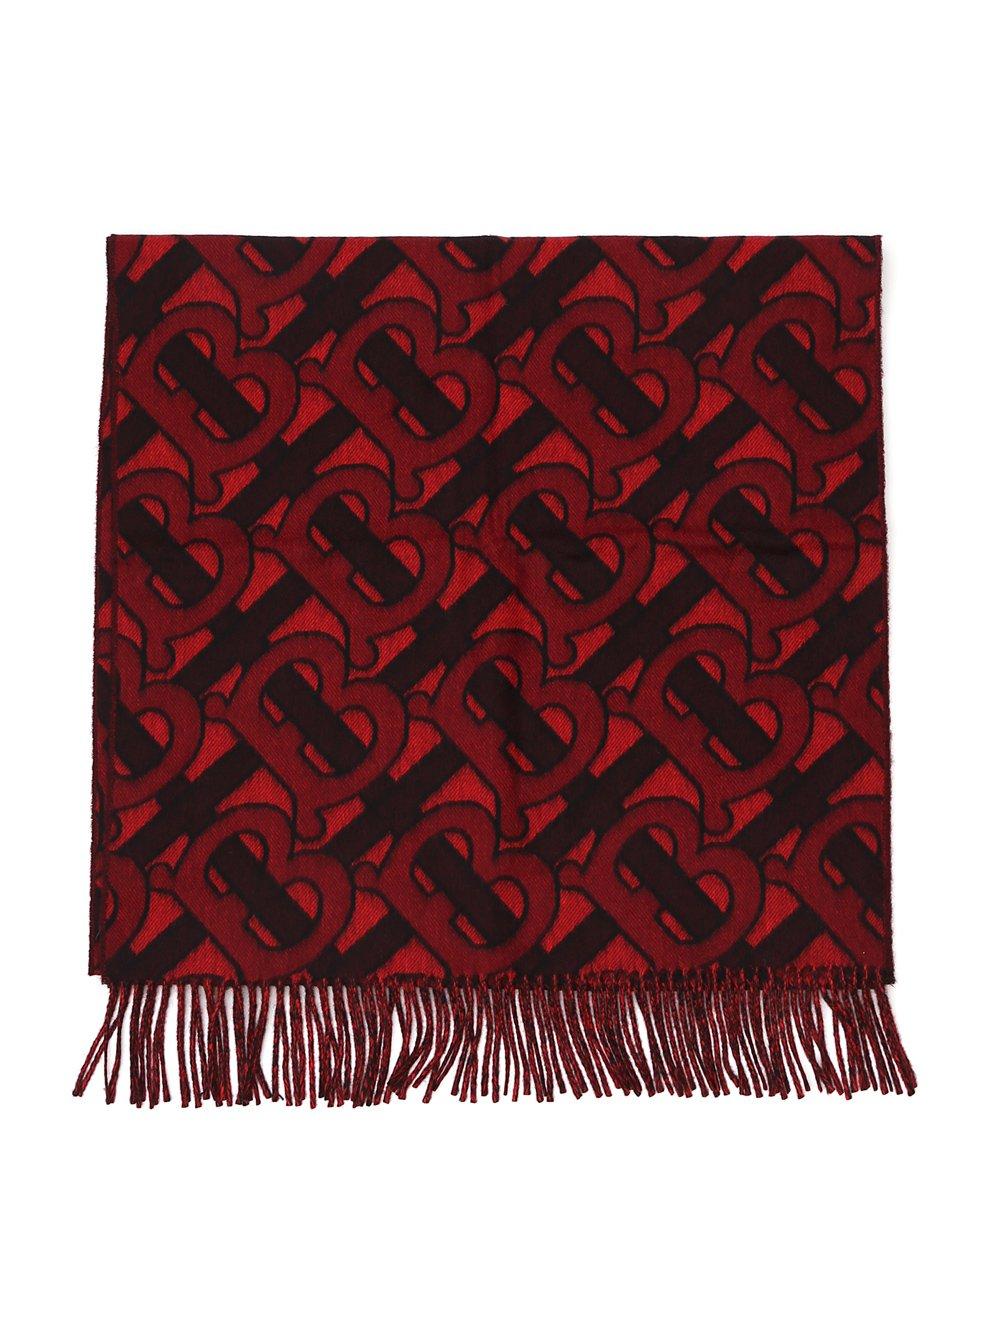 Burberry Cashmere Monogram Jacquard Scarf in Red - Lyst